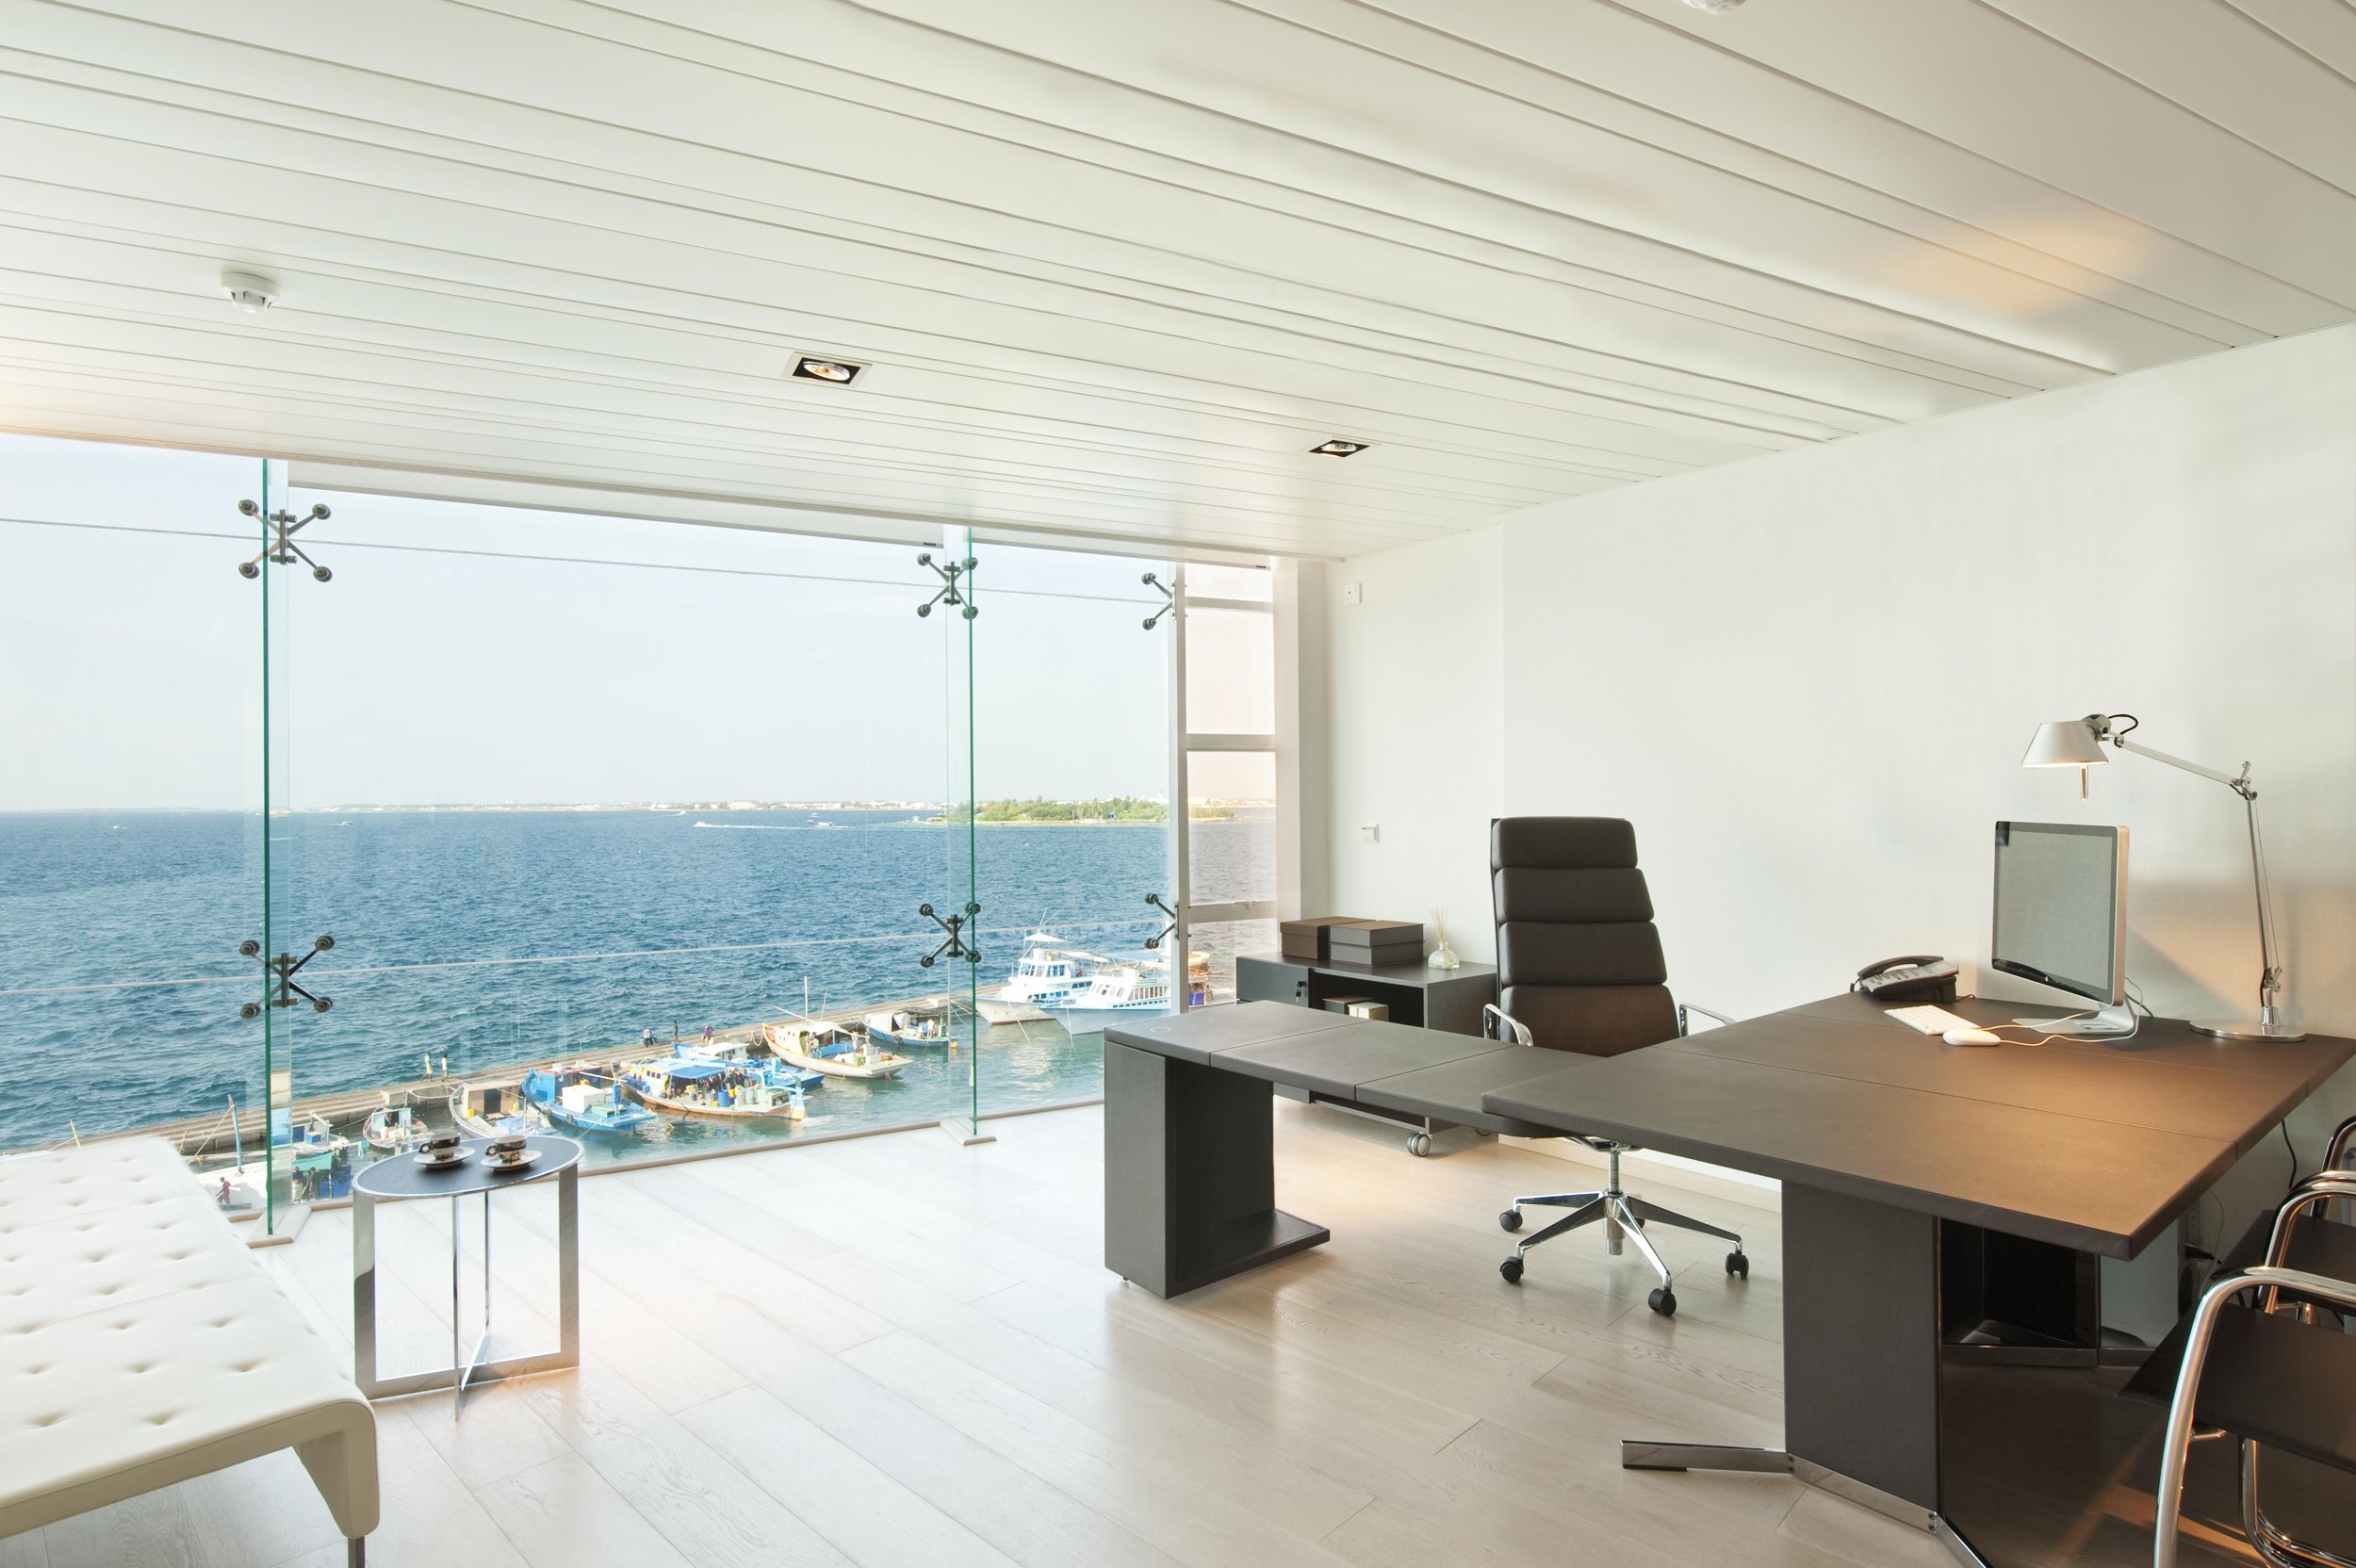 Office rental on the coast of Israel: a business adventure by the sea